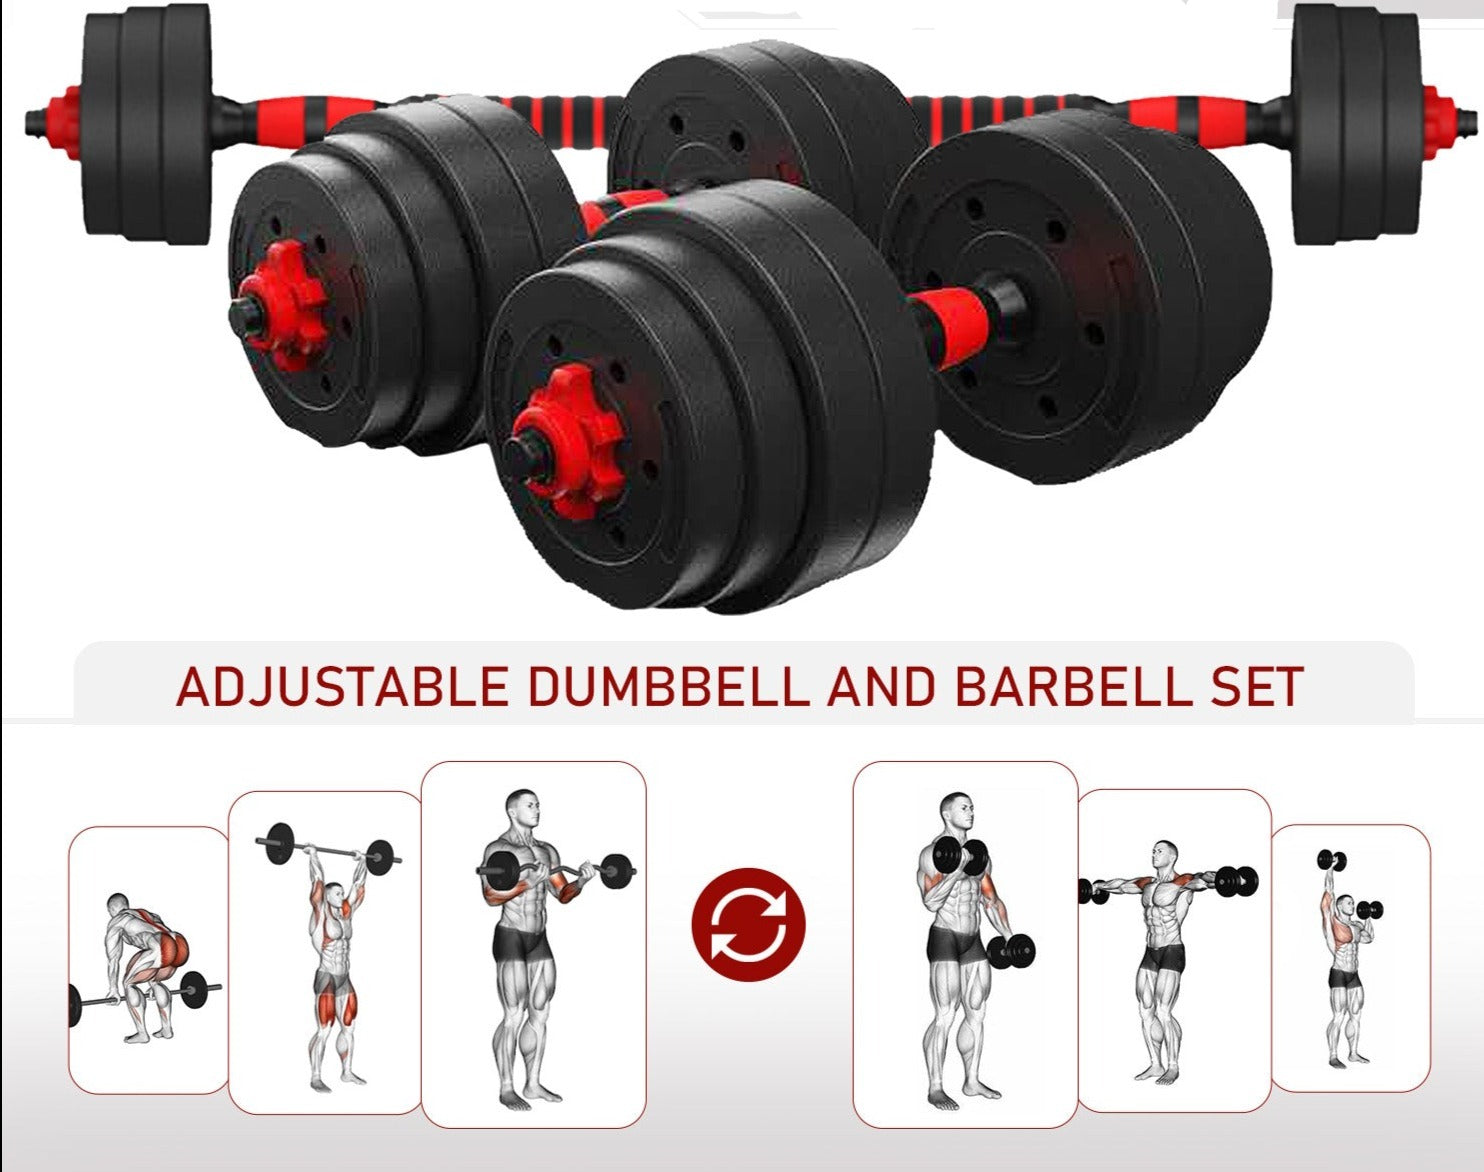 Barbell and dumbbells set